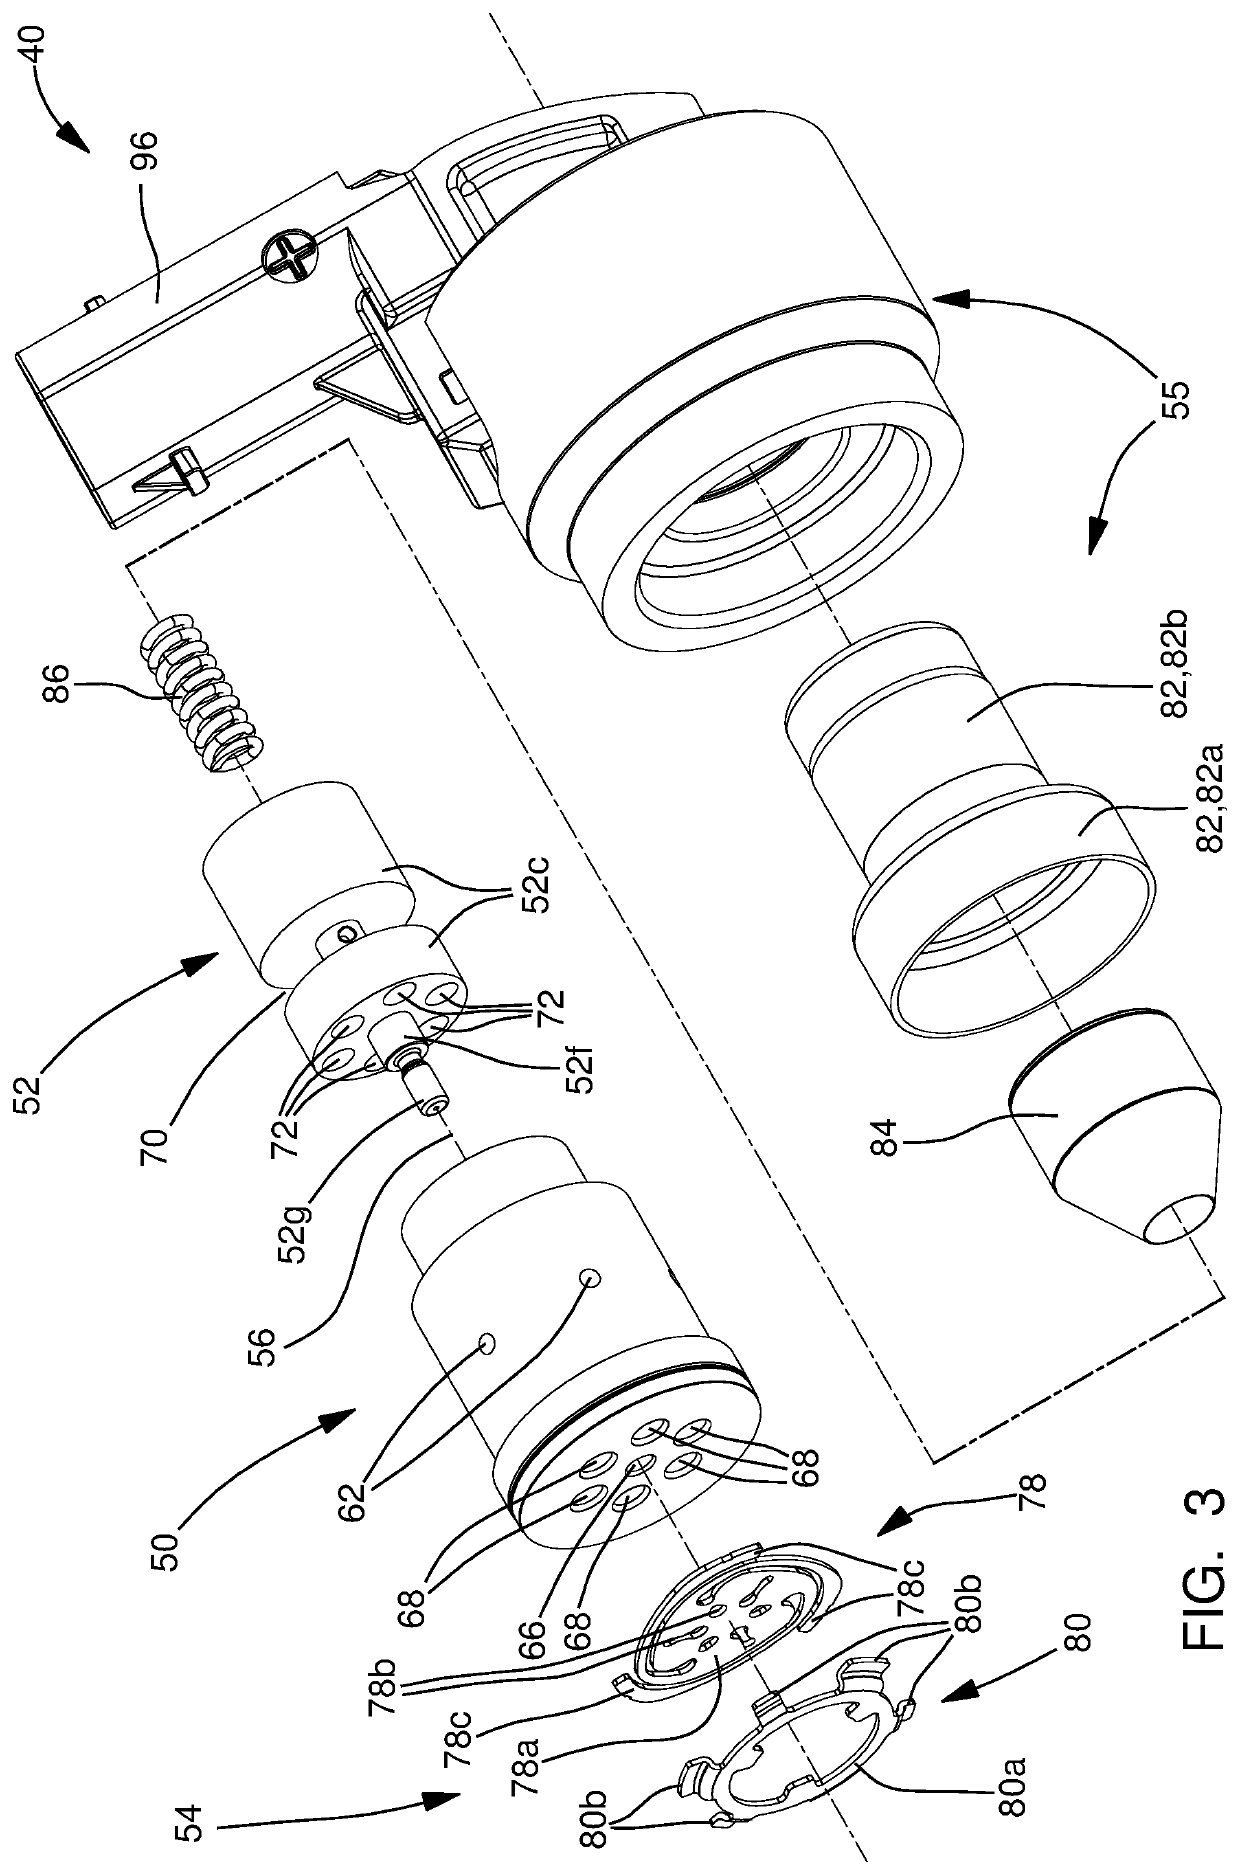 Fuel pump for gasoline direct injection